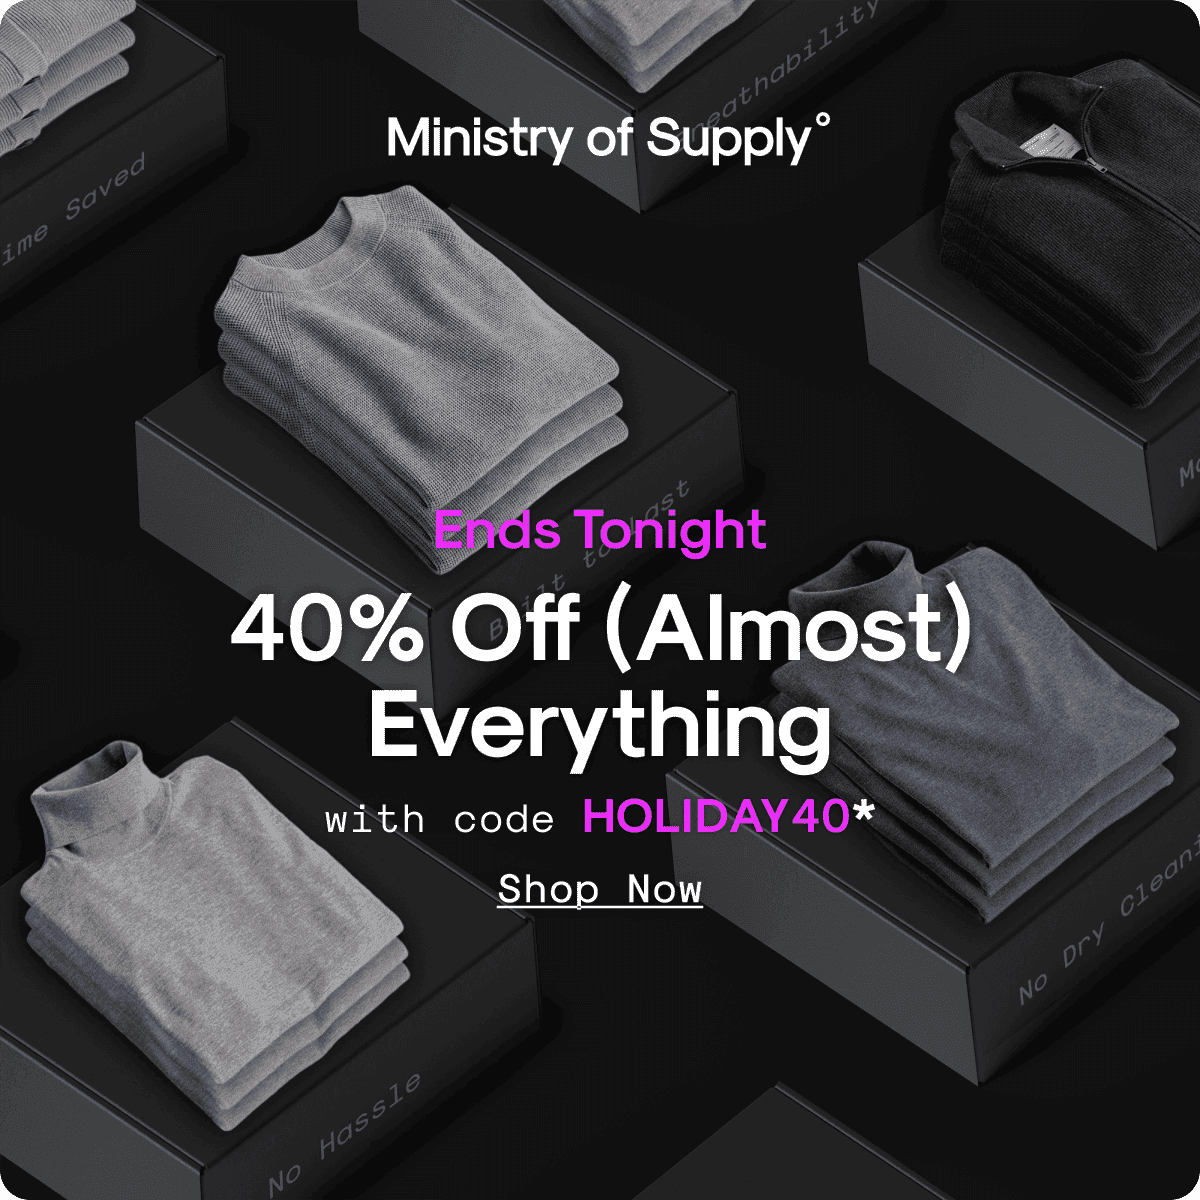 Ends Tonight: 40% Off (Almost) Everything